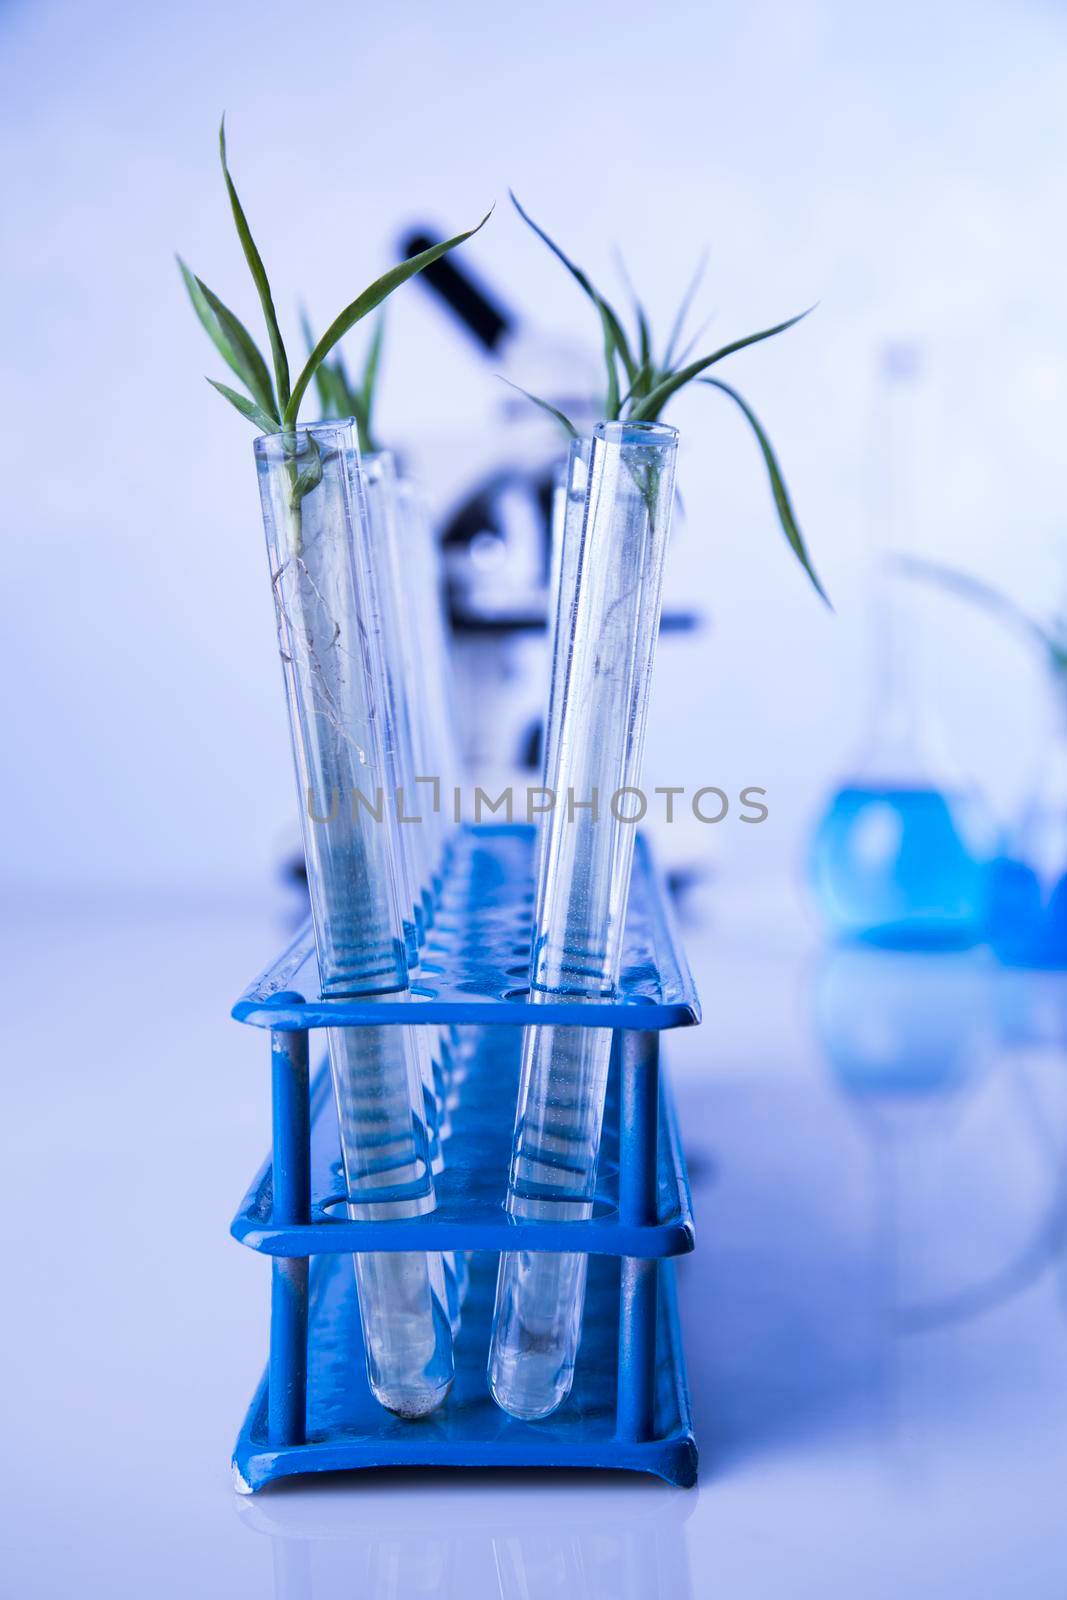 Plant in a test tube of the scientist